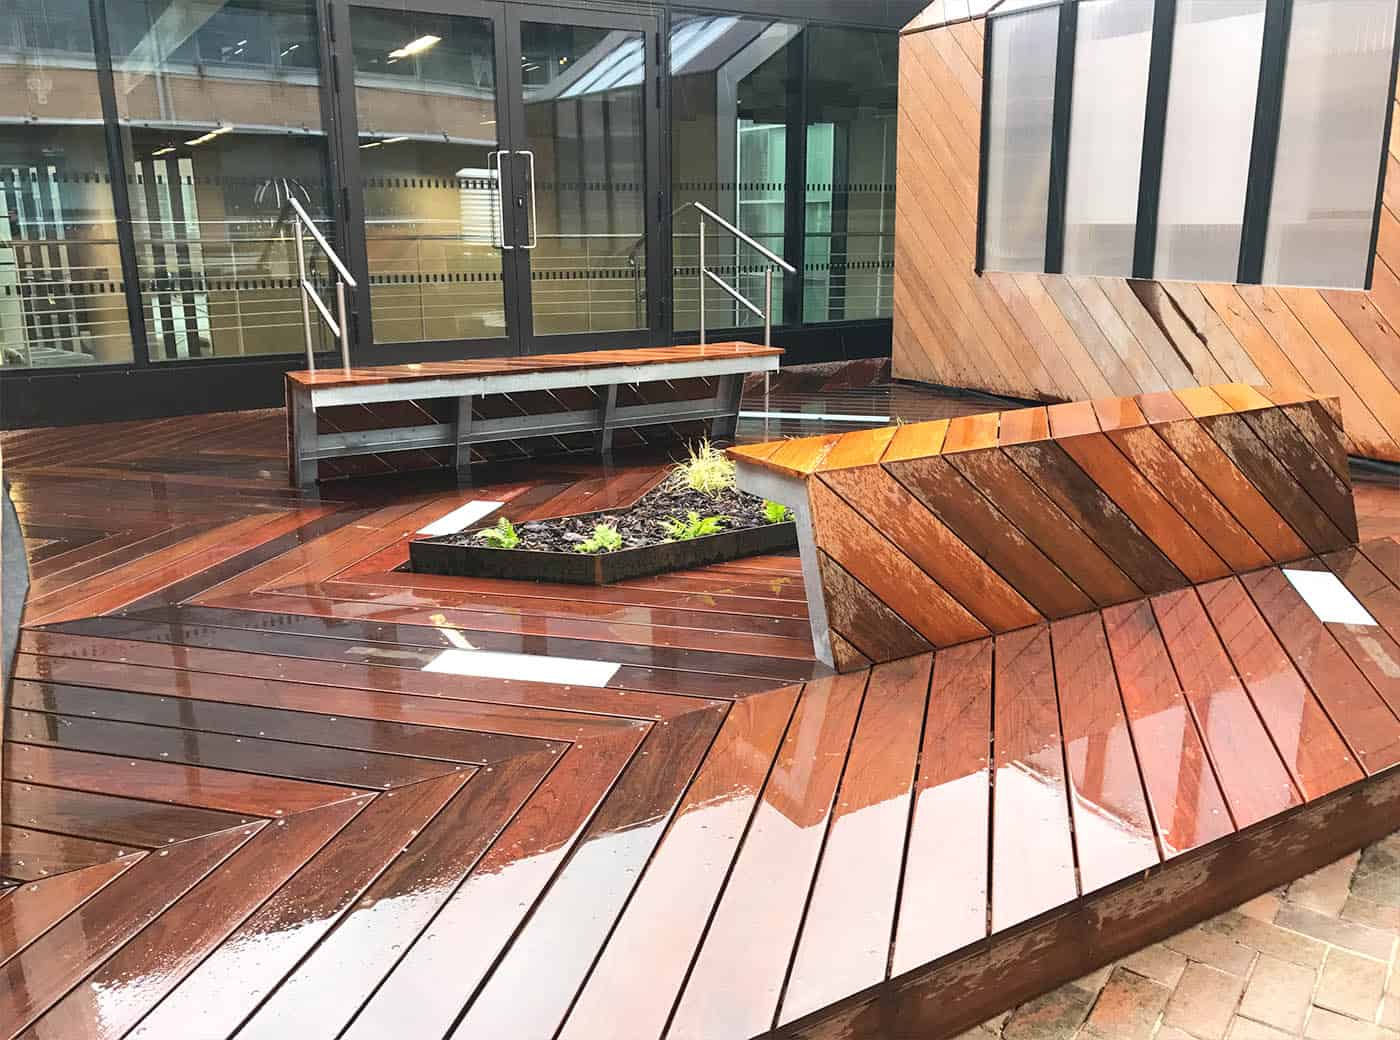 Commercial decking for roof gardens